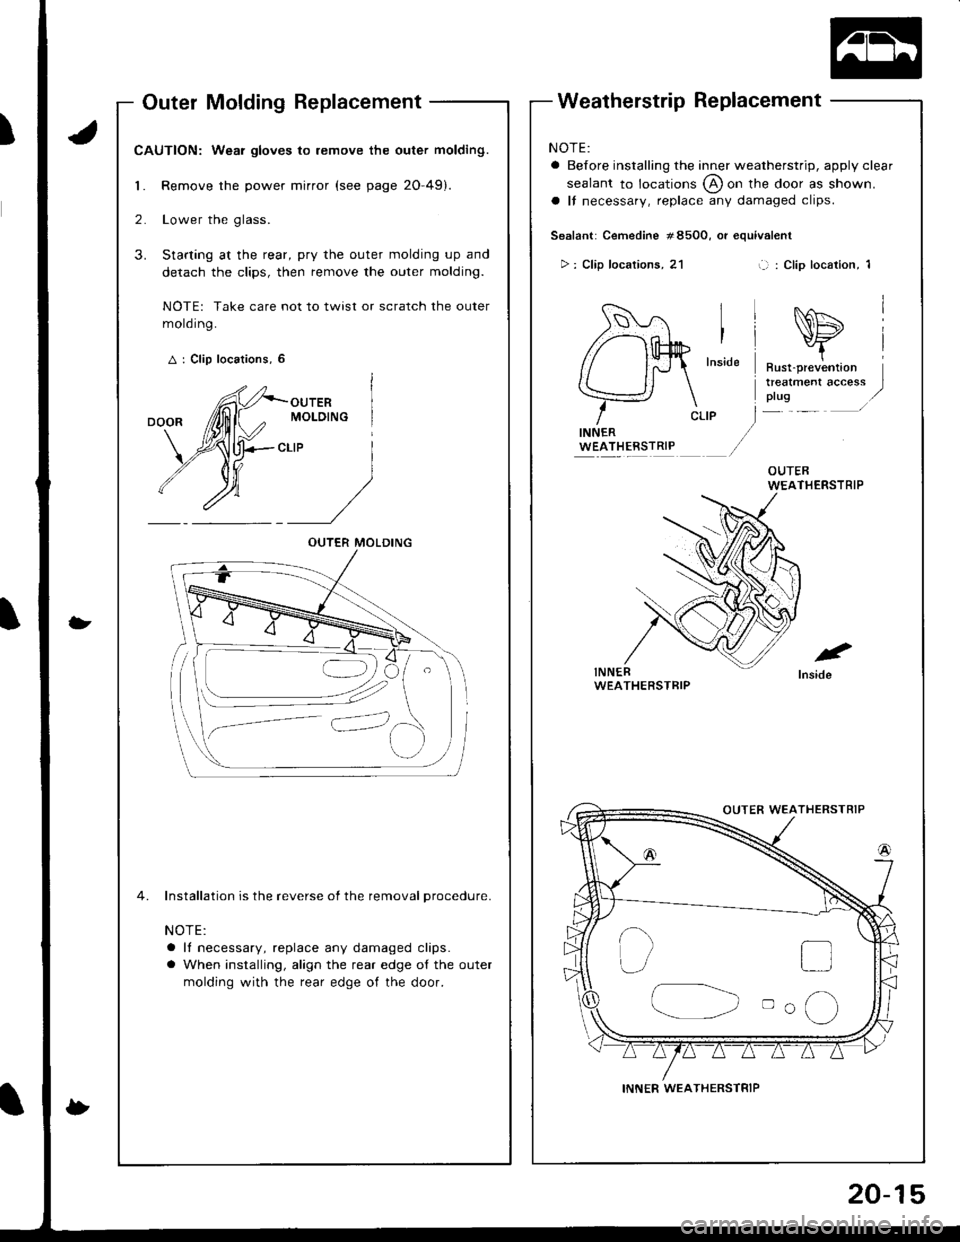 HONDA INTEGRA 1998 4.G Workshop Manual Outer Molding Replacement
CAUTION: Wear gloves to remove the outer molding.
1. Remove the power mirror (see page 20-49).
2. Lower the glass.
3. Starting at the rear, pry the outer molding up and
detac